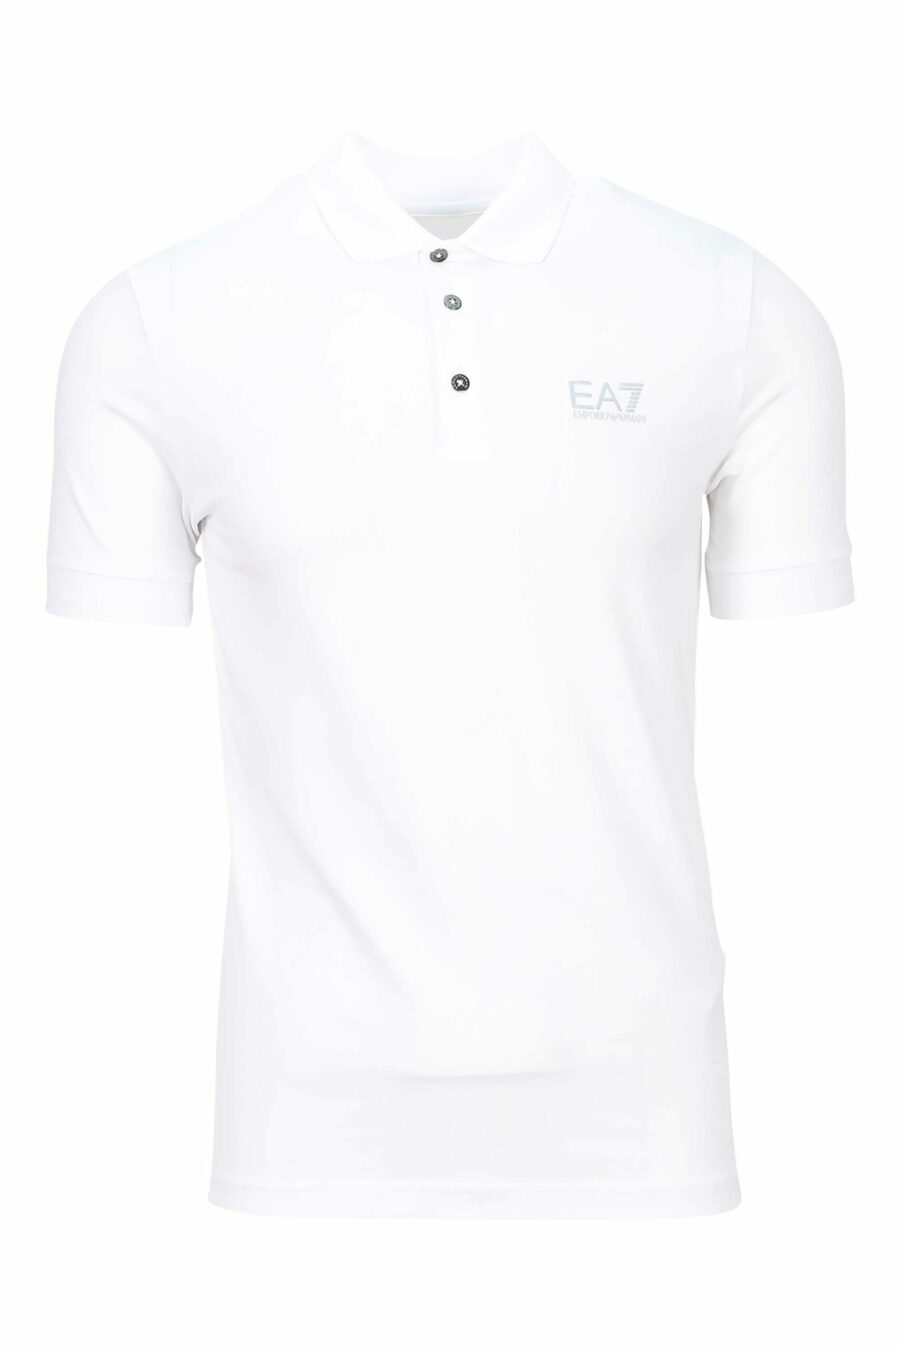 White polo shirt with silver gradient mini-logo "lux identity" - 8055187159944 1 scaled